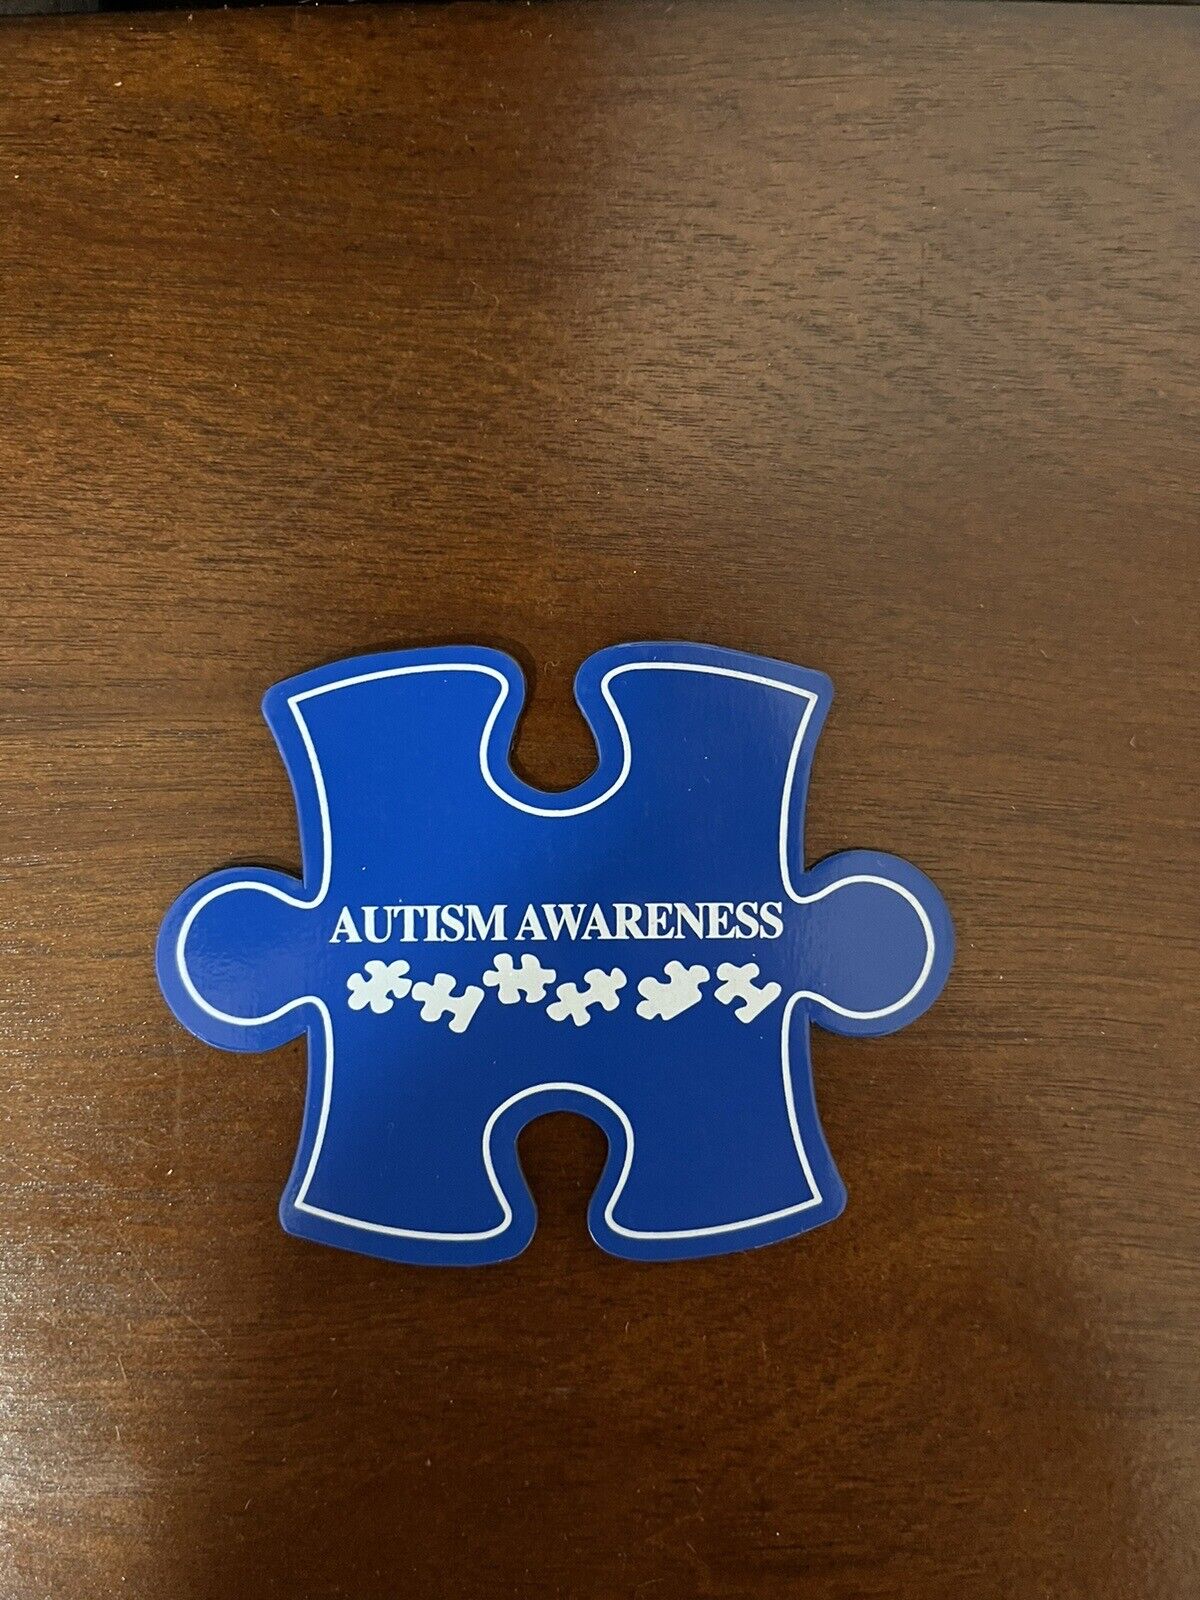 Lot Of 50 Autism Awareness Magnets- Mini Size 2” X 4” Approximately